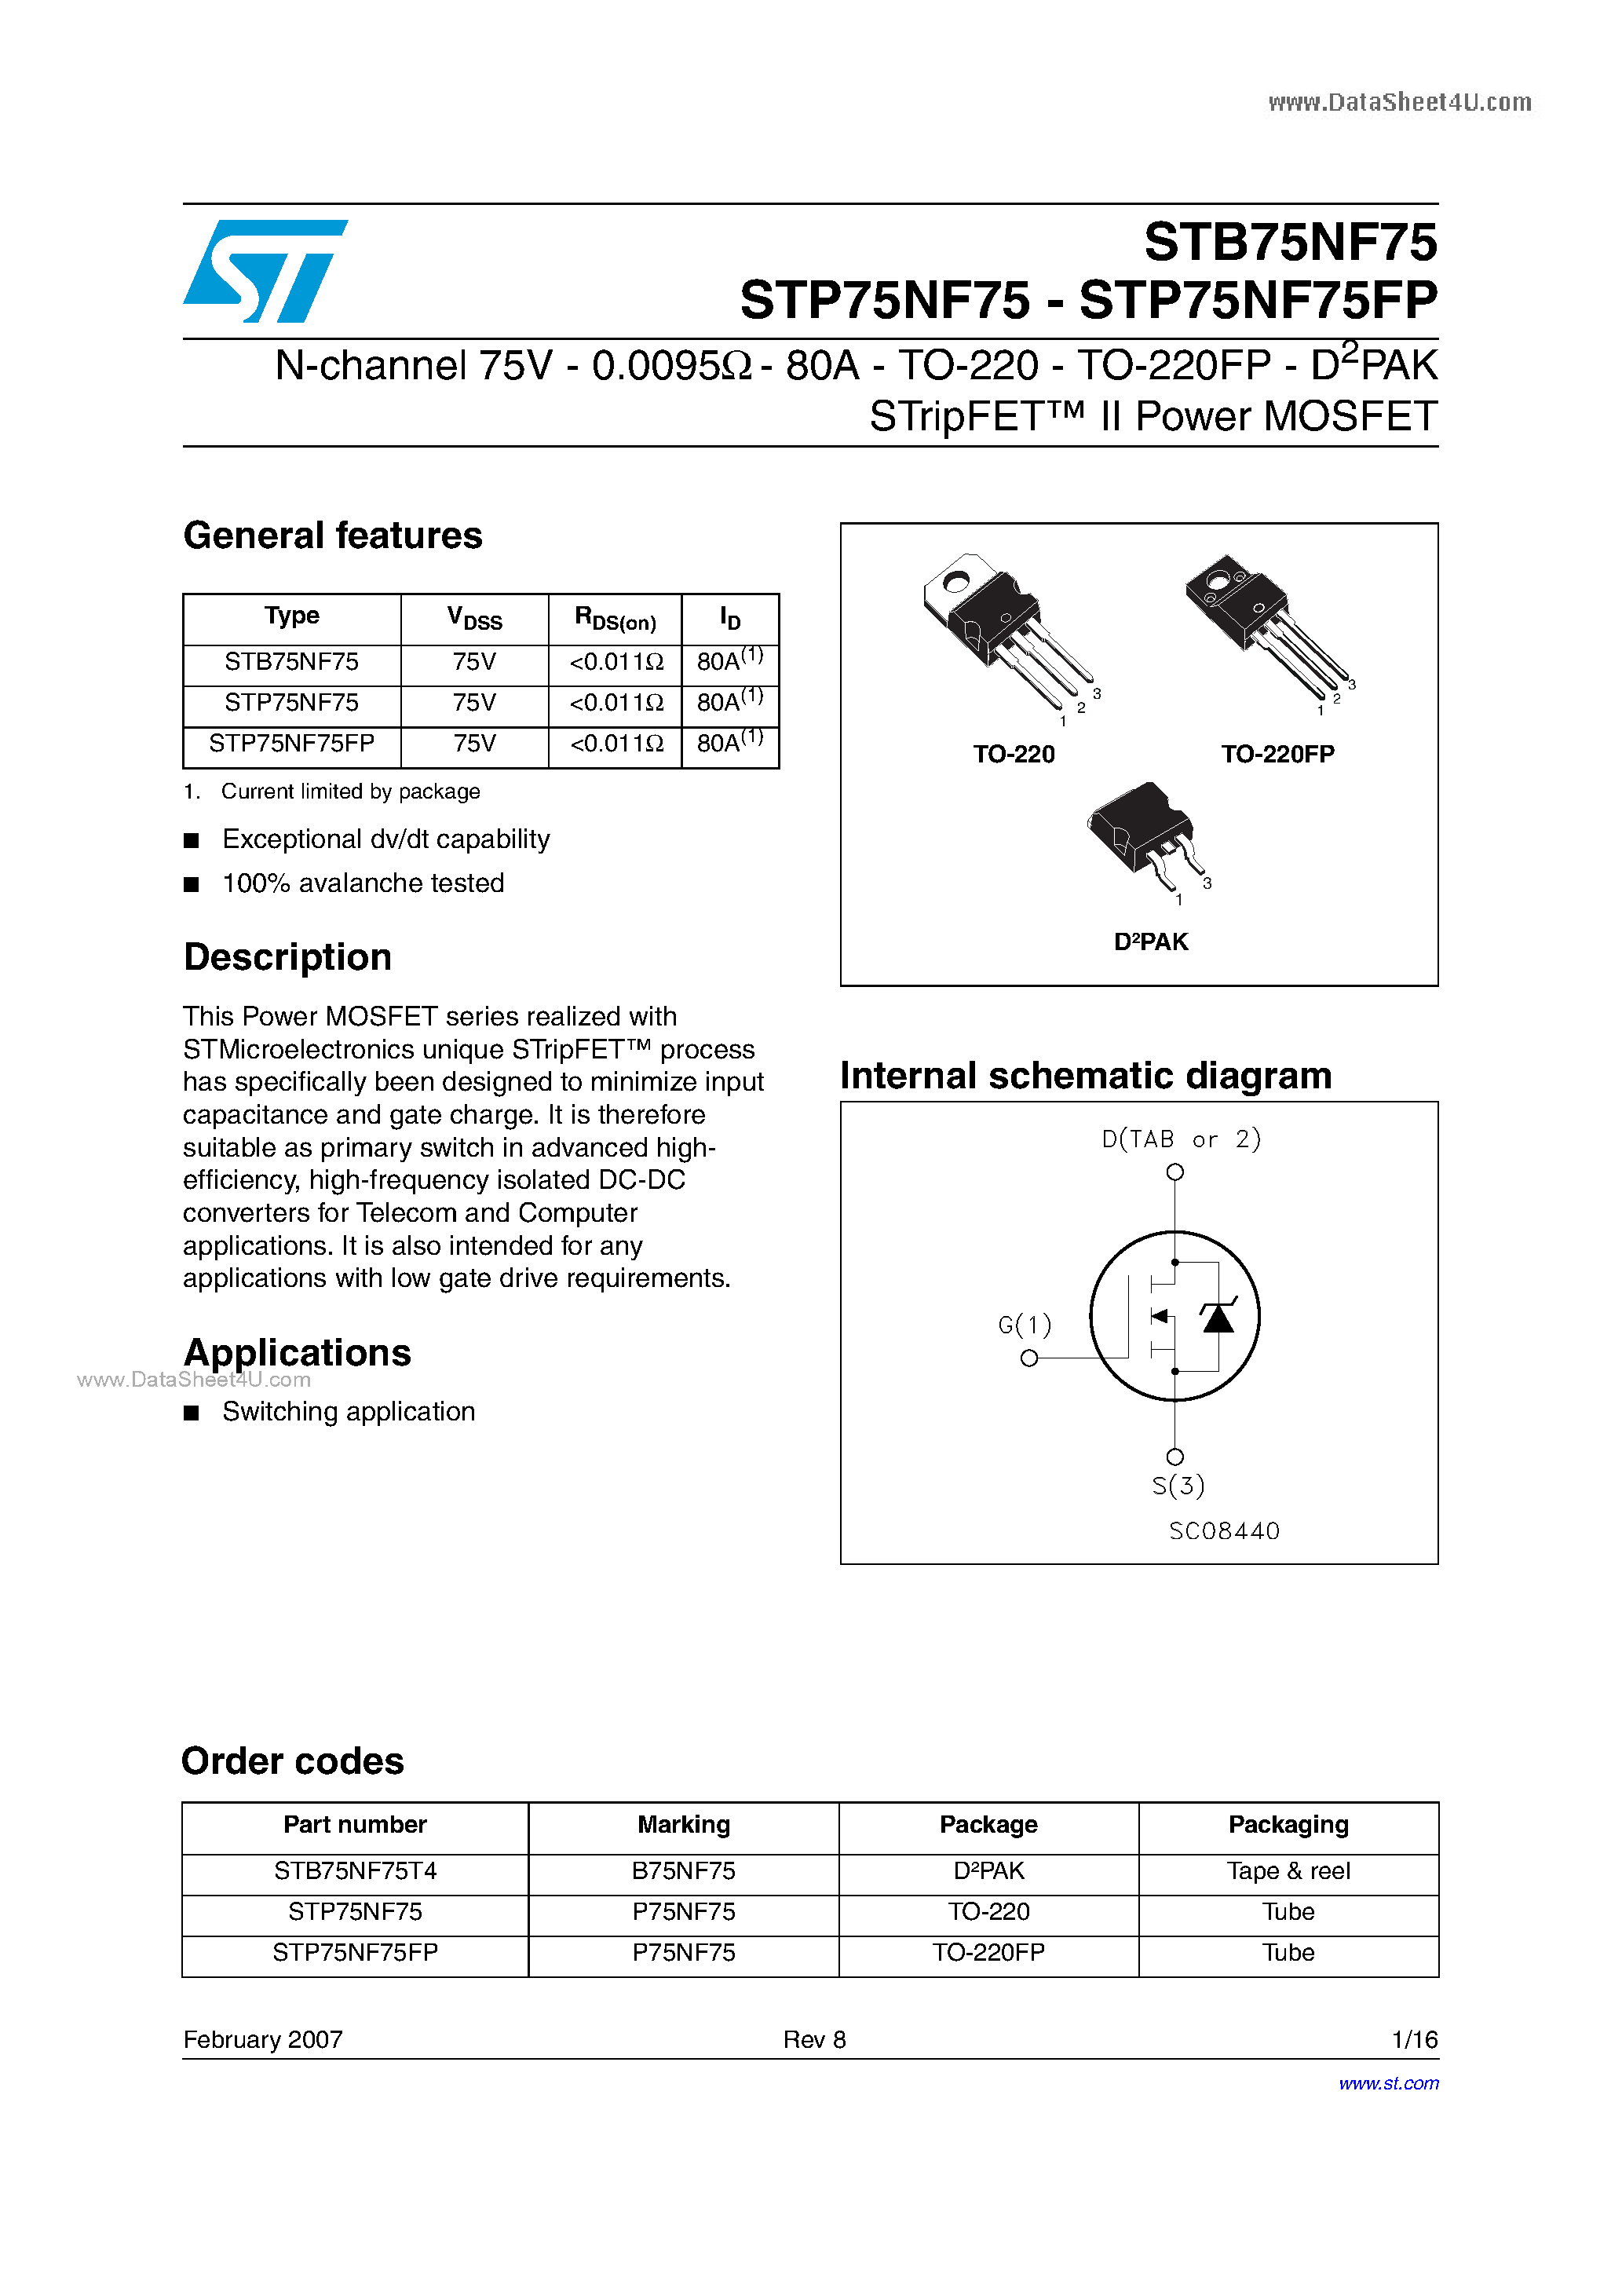 Datasheet P75NF75 - Search -----> STP75NF75 page 1